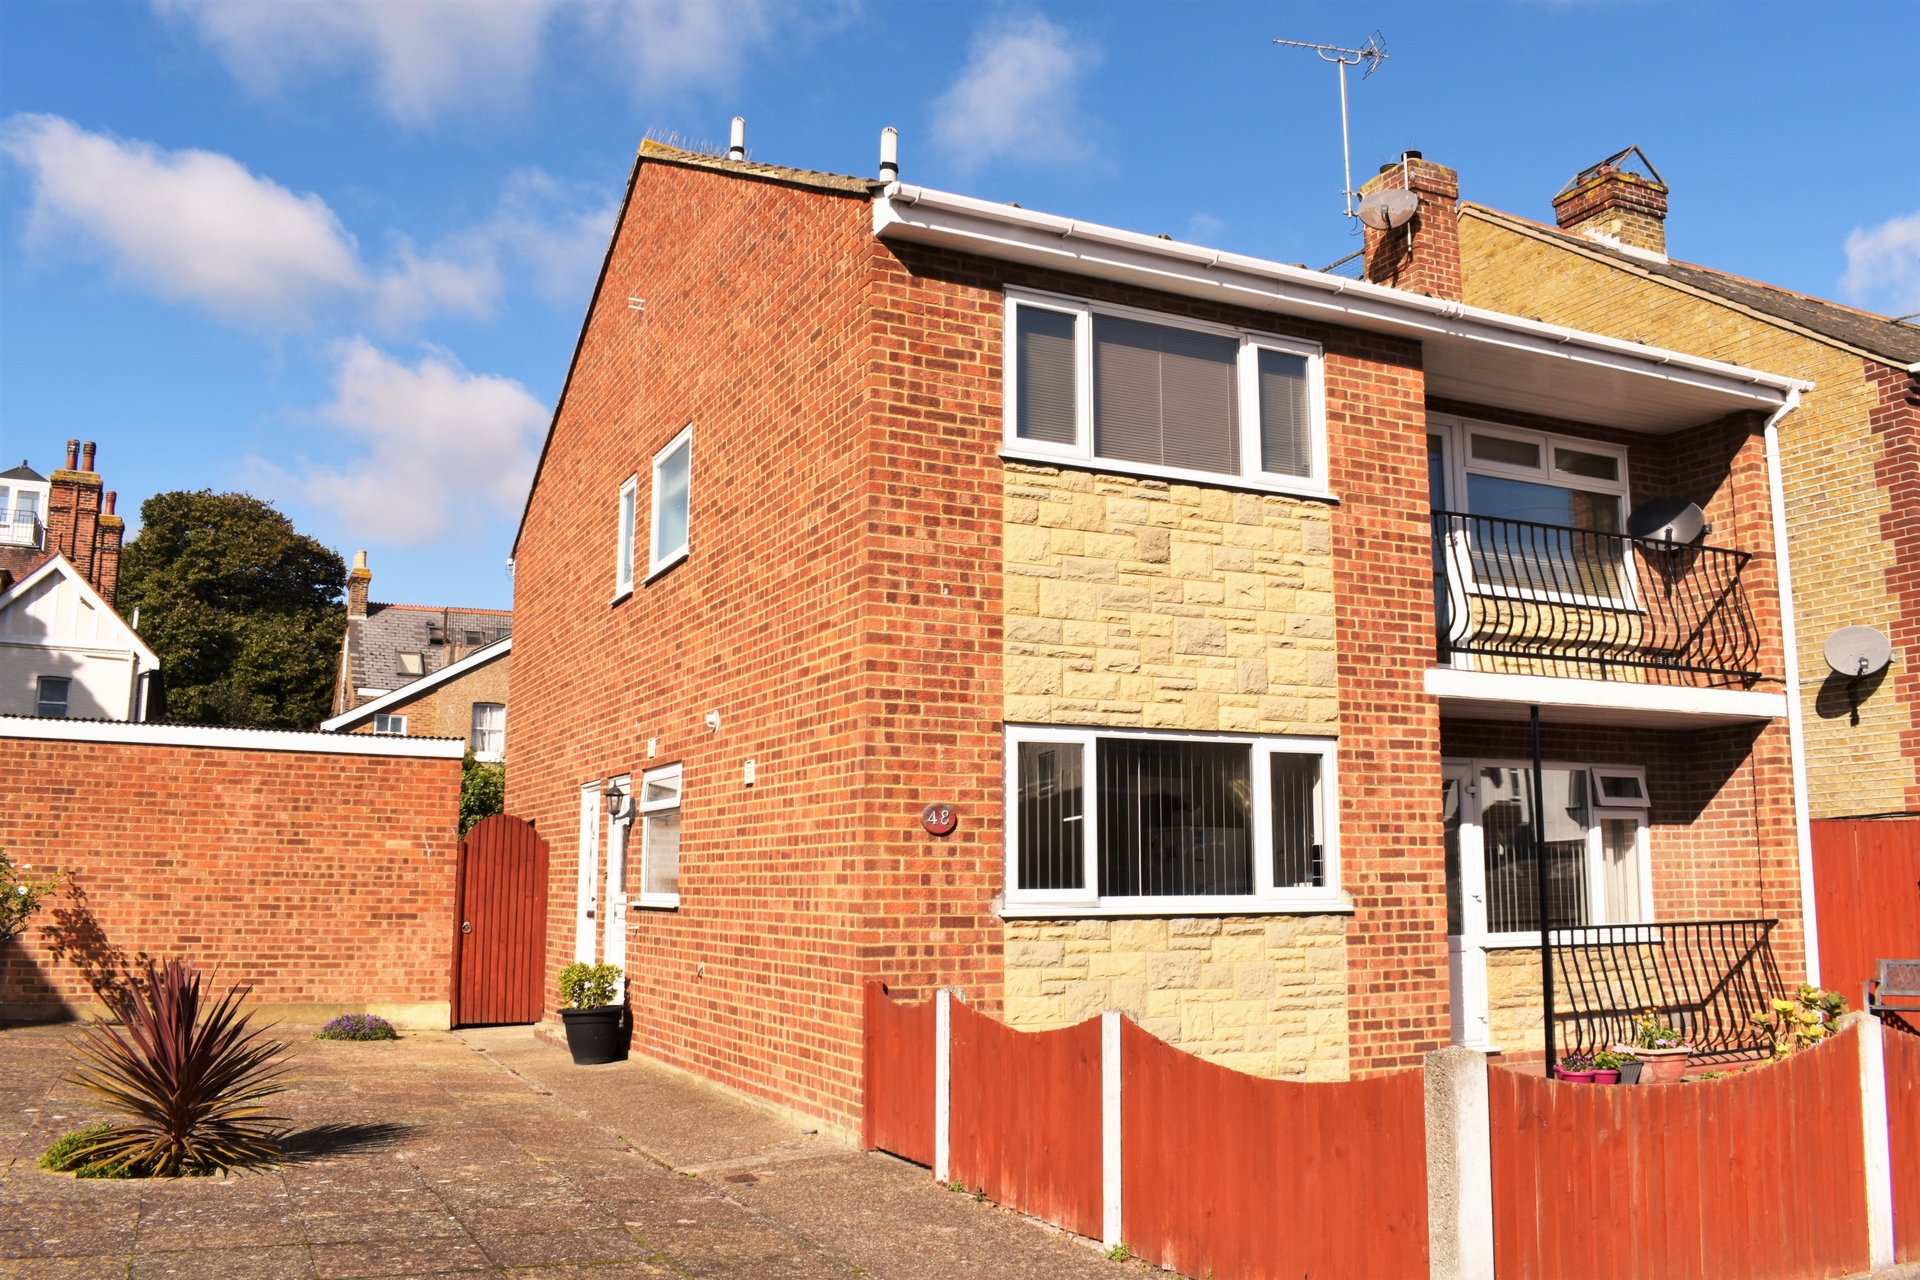 2 bed maisonette to rent in Osborne Road, Broadstairs - Property Image 1